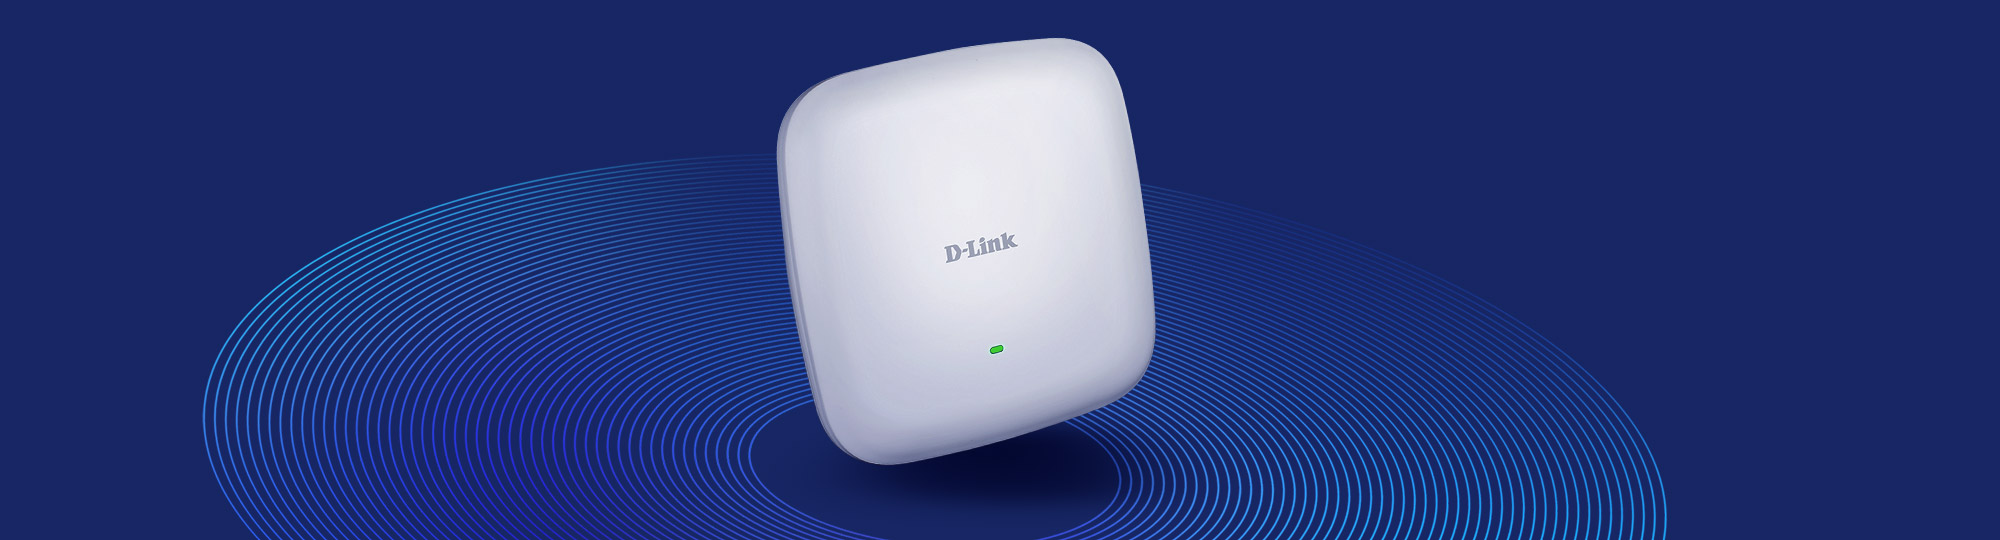 DAP-2682 Wireless AC2300 Wave 2 Dual-Band PoE Access Point with wireless coverage waves.